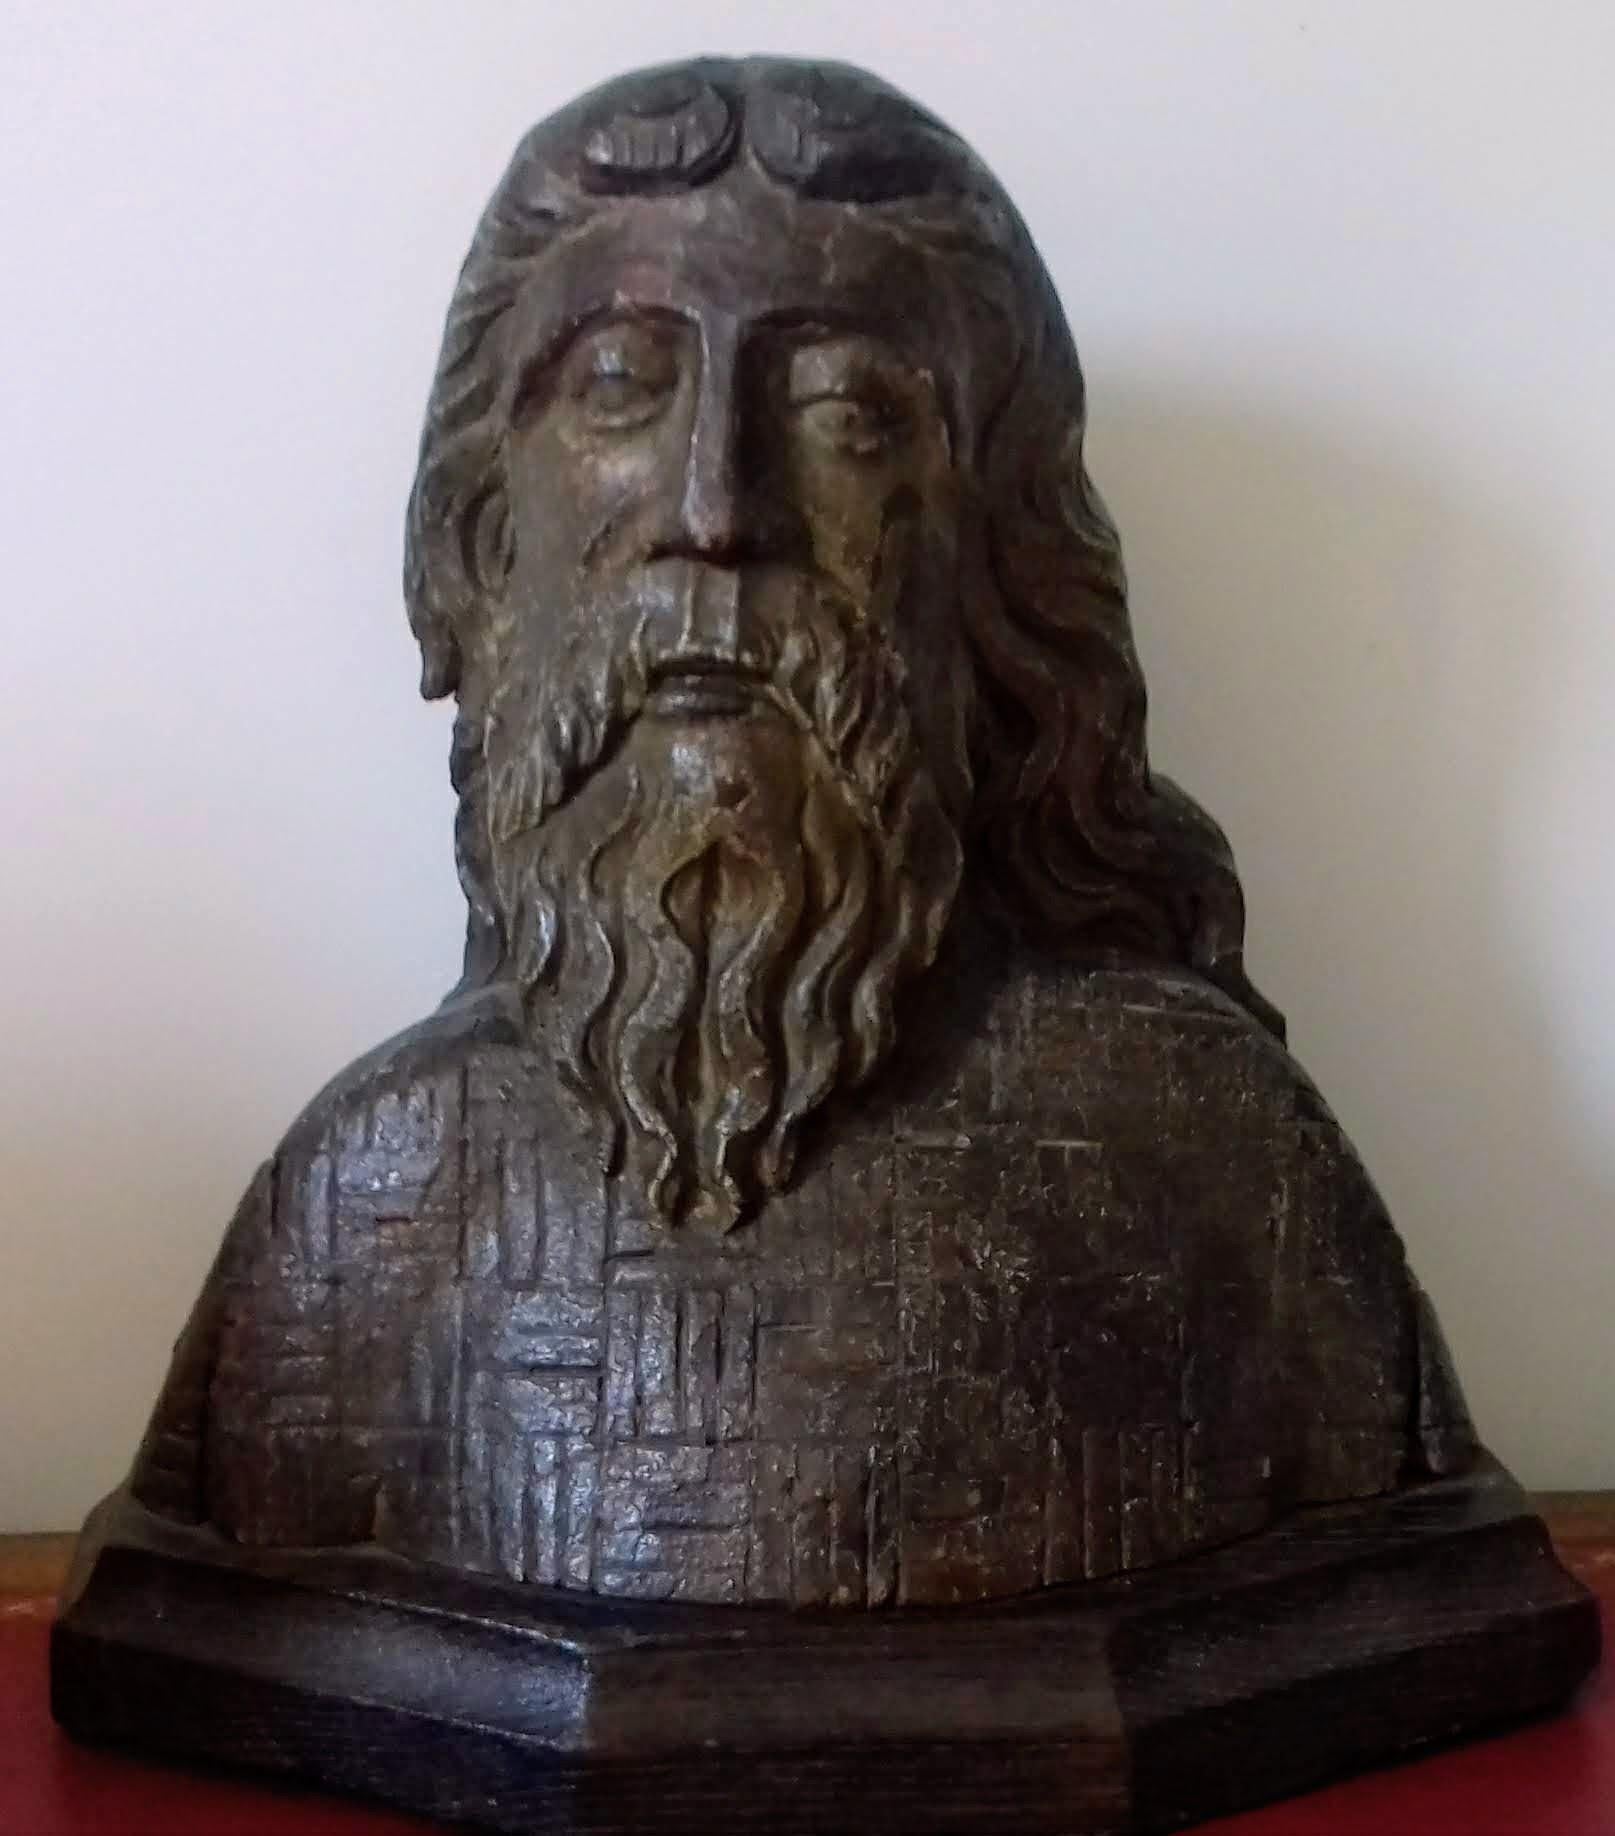 Unknown Figurative Sculpture - Early Renaissance 15th Century Gothic Bust of a saint or secular figure carving